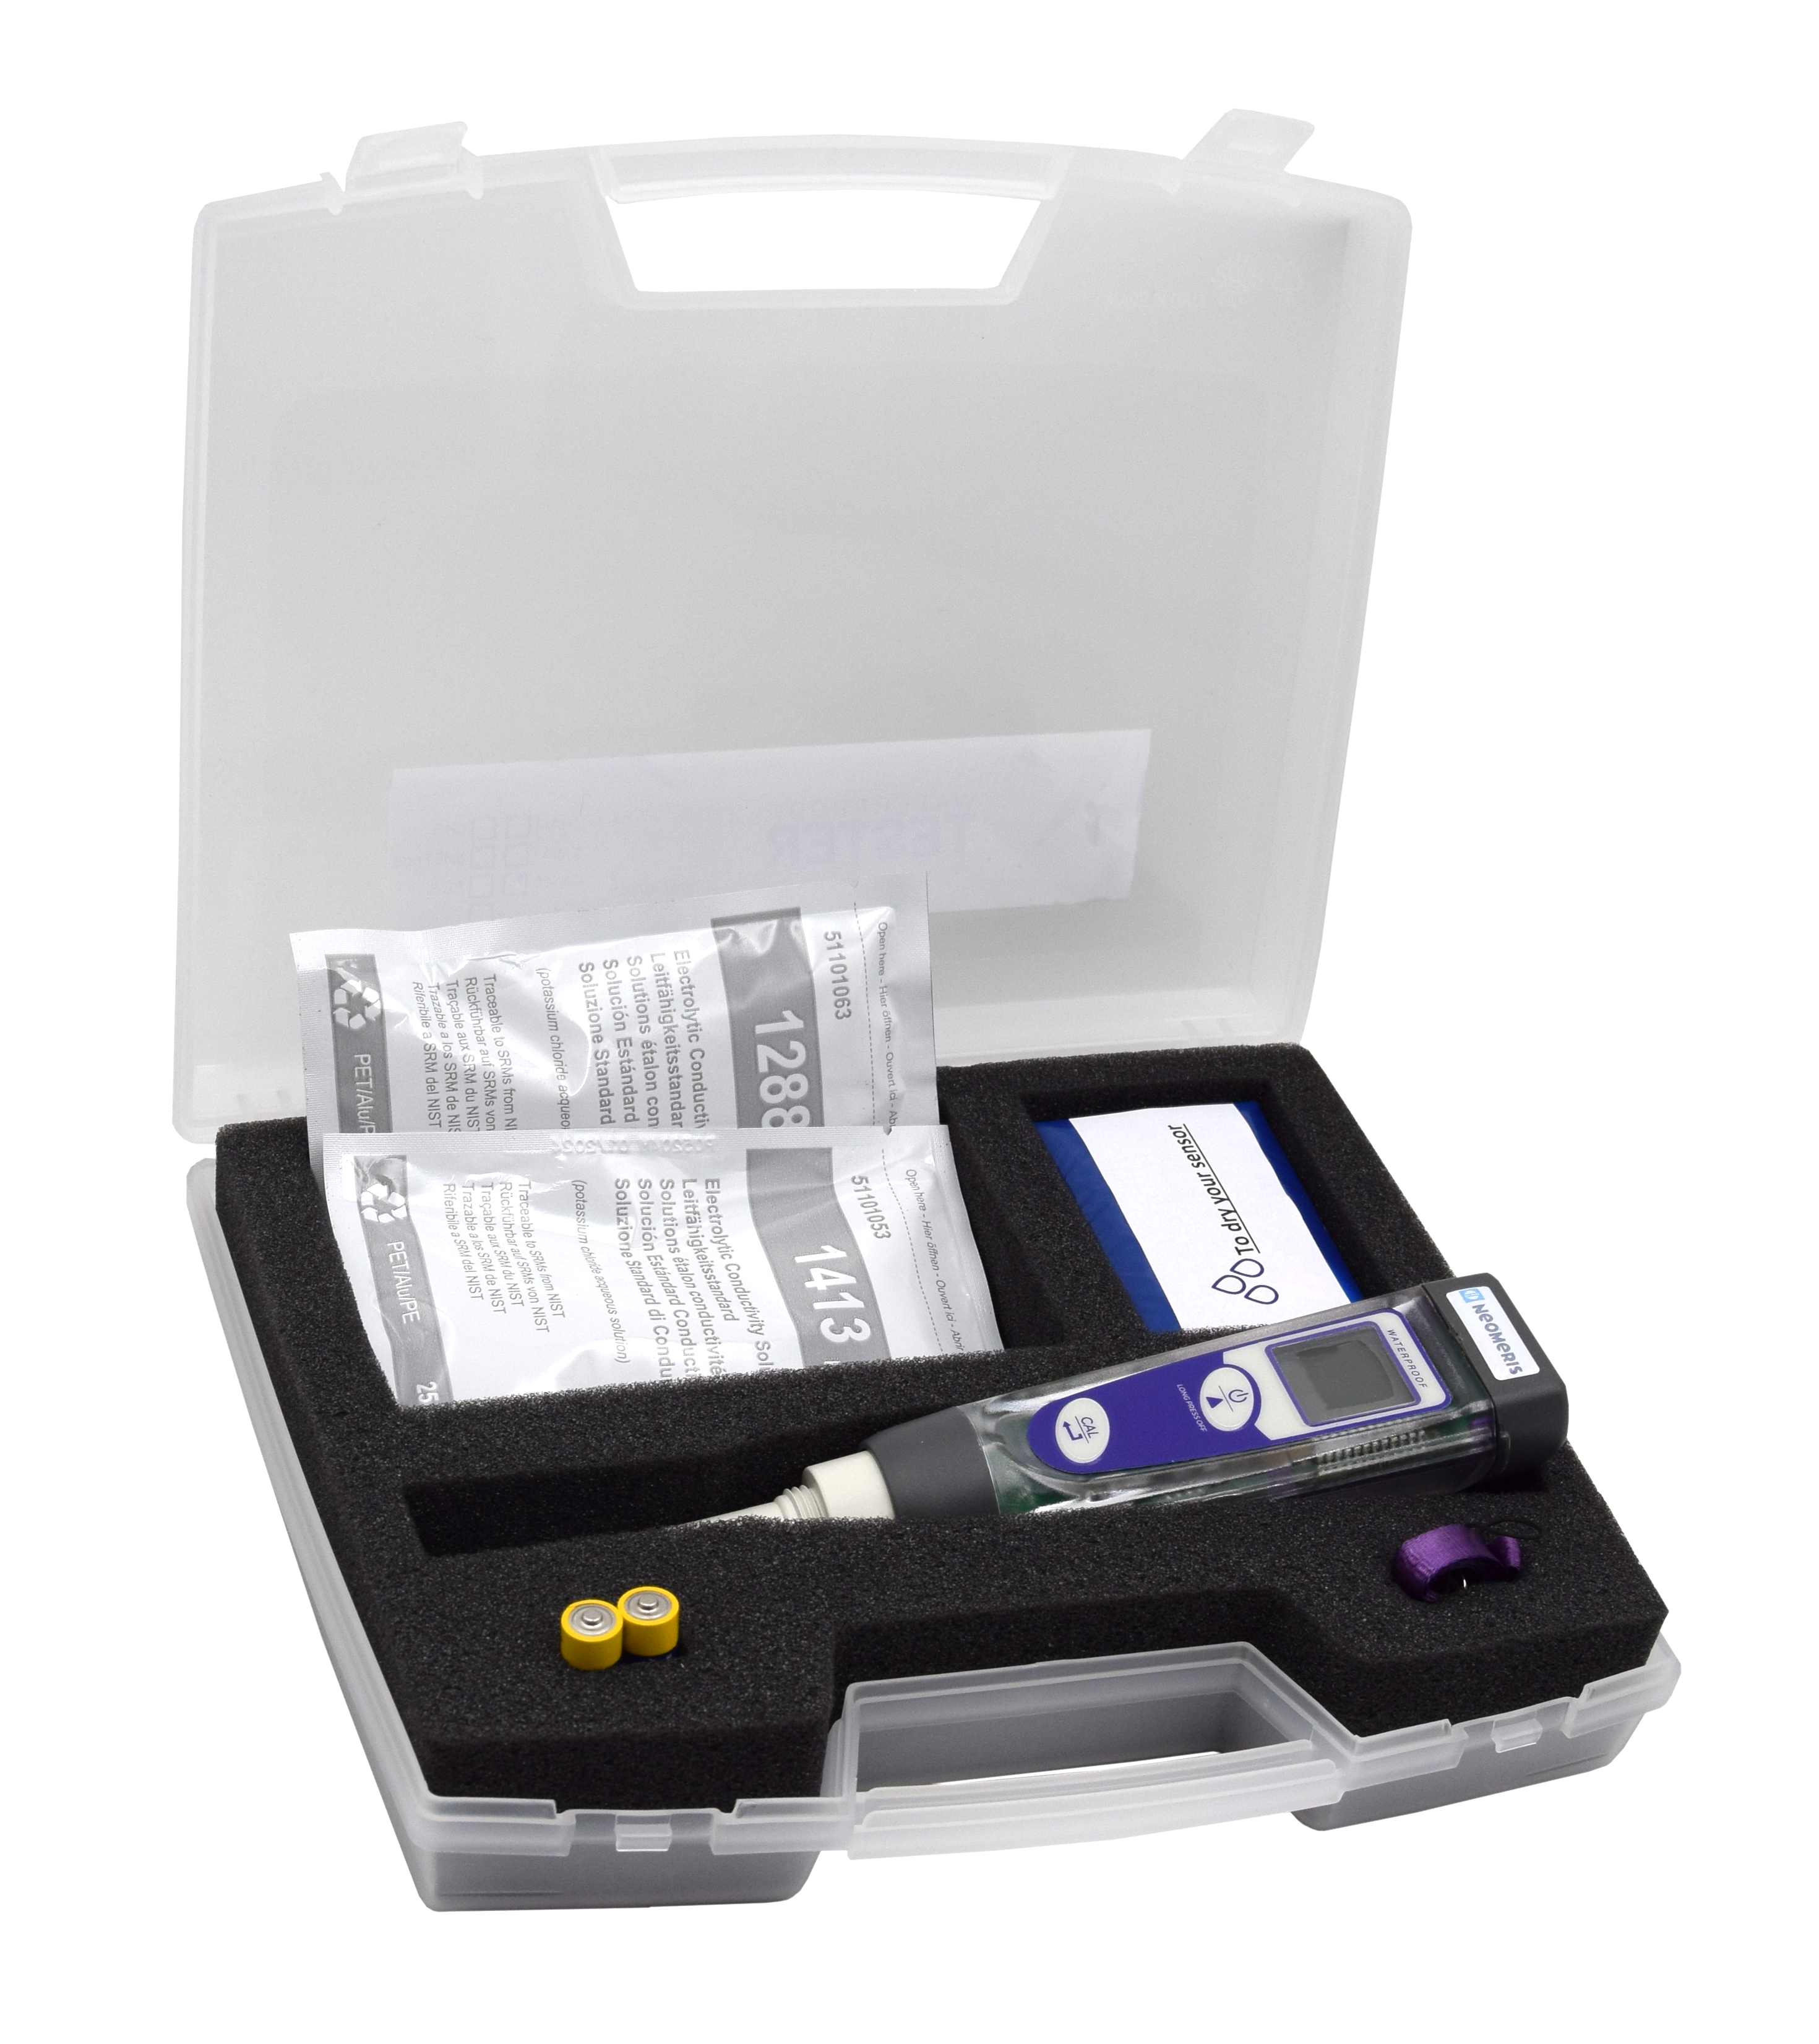 XS COND 1 Tester in carrying case - Hand tester for determining the electric conductivity value